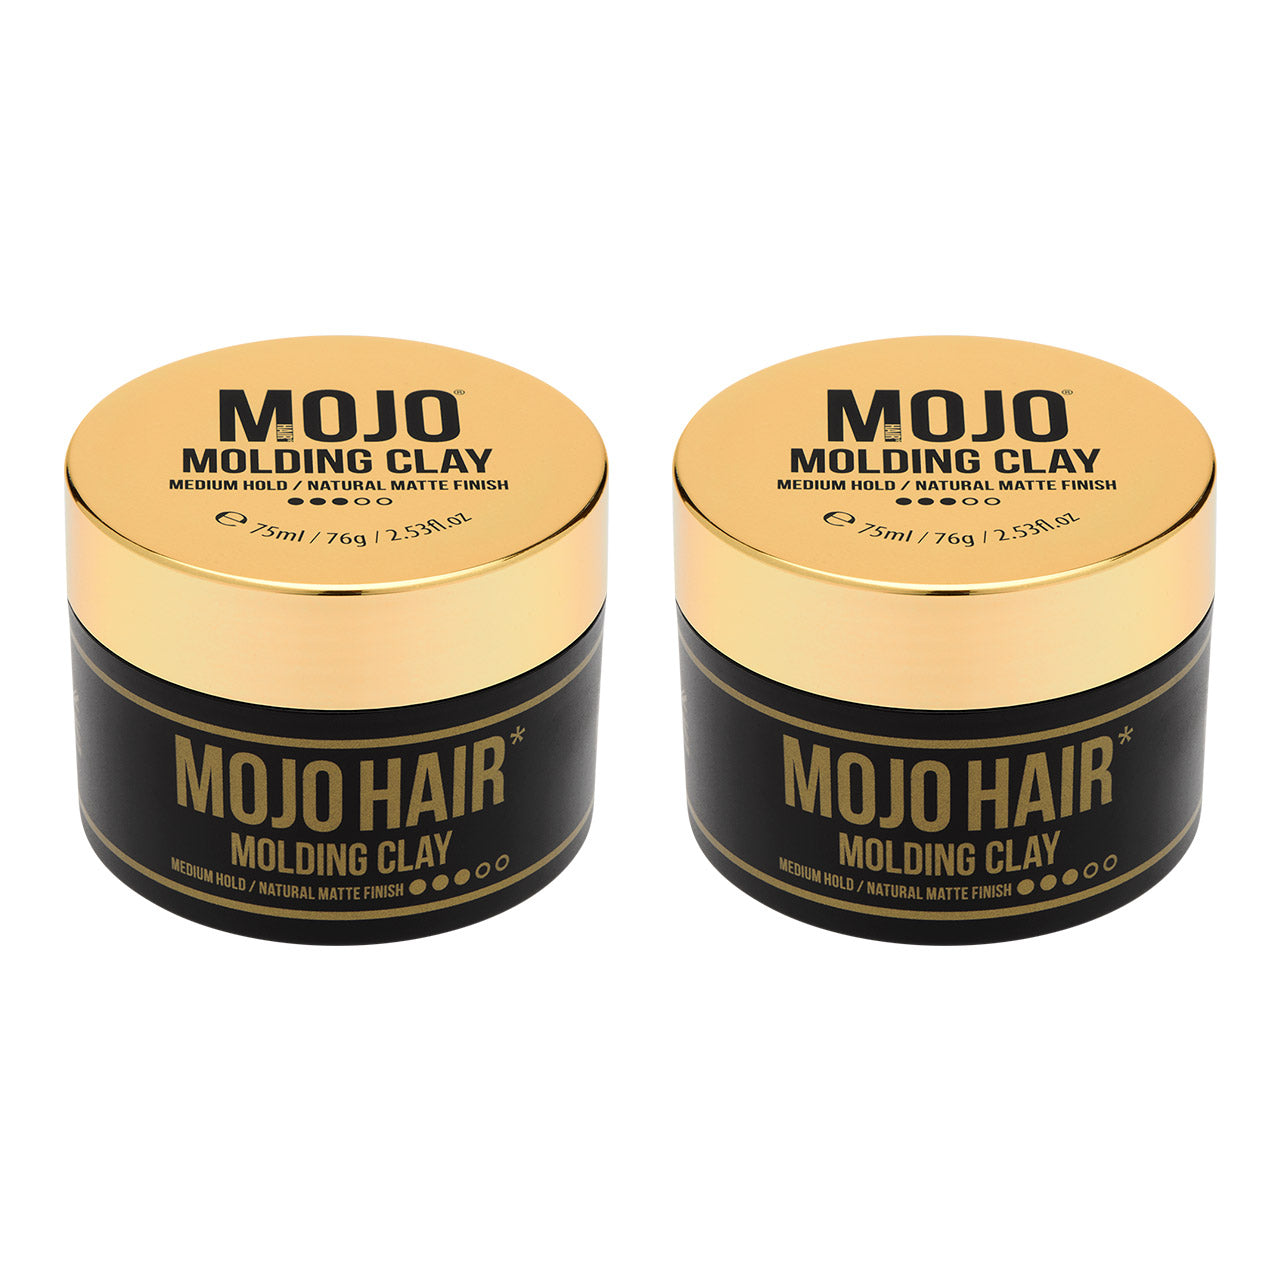 Mojo Hair Molding Clay (75ml) x 2 Packs of Mojo Hair Molding Clay (75ml) Full pack shot photographic image features stylish gold lid and and black tub with retro twist design and key product benefits MOJO Hair Molding clay medium hold/Natural matte Finish 75ml/76g/2.53 fl.oz image on white back ground